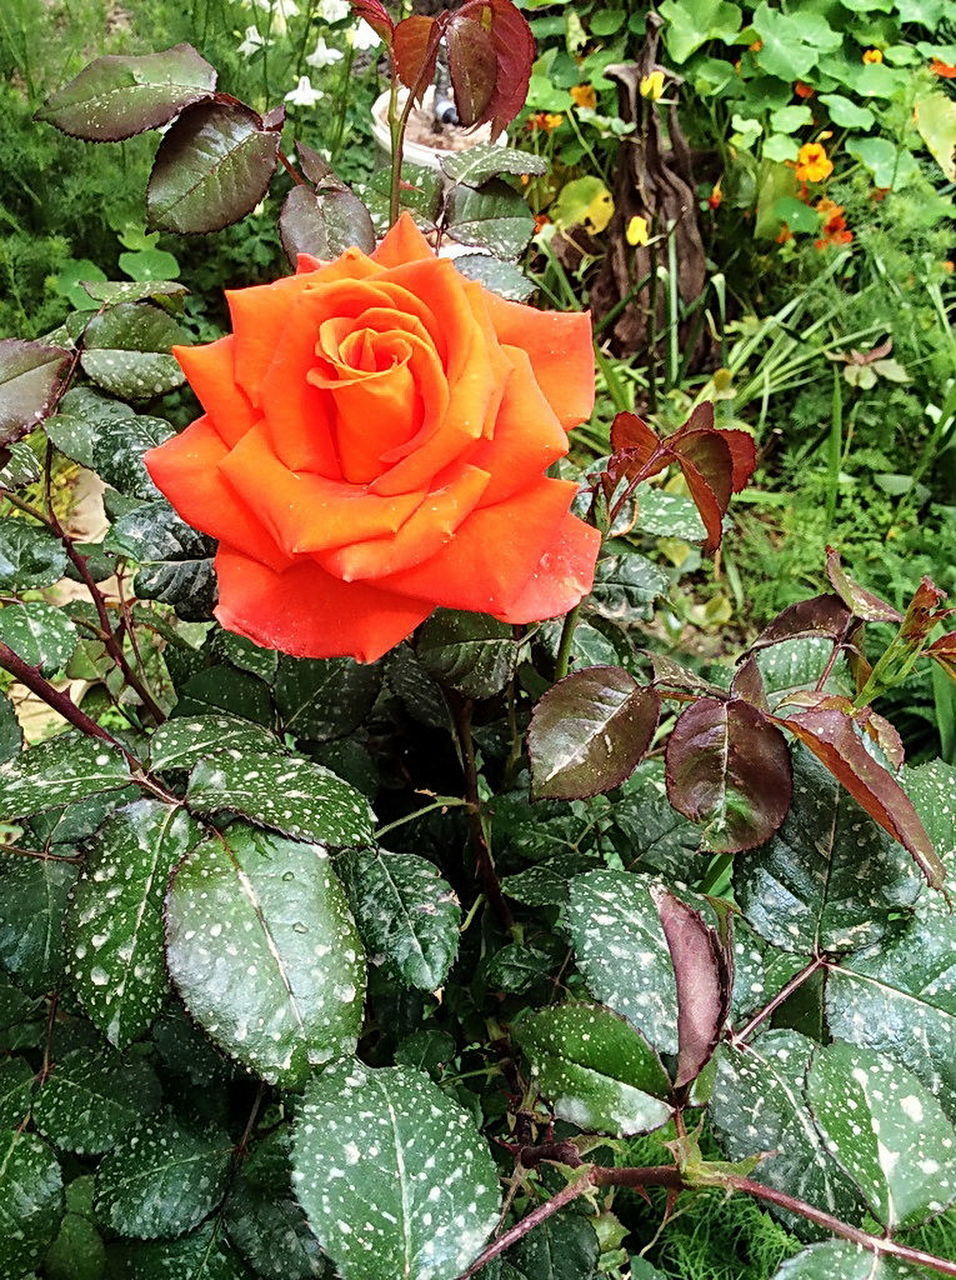 CLOSE-UP OF ROSE AGAINST RED PLANTS